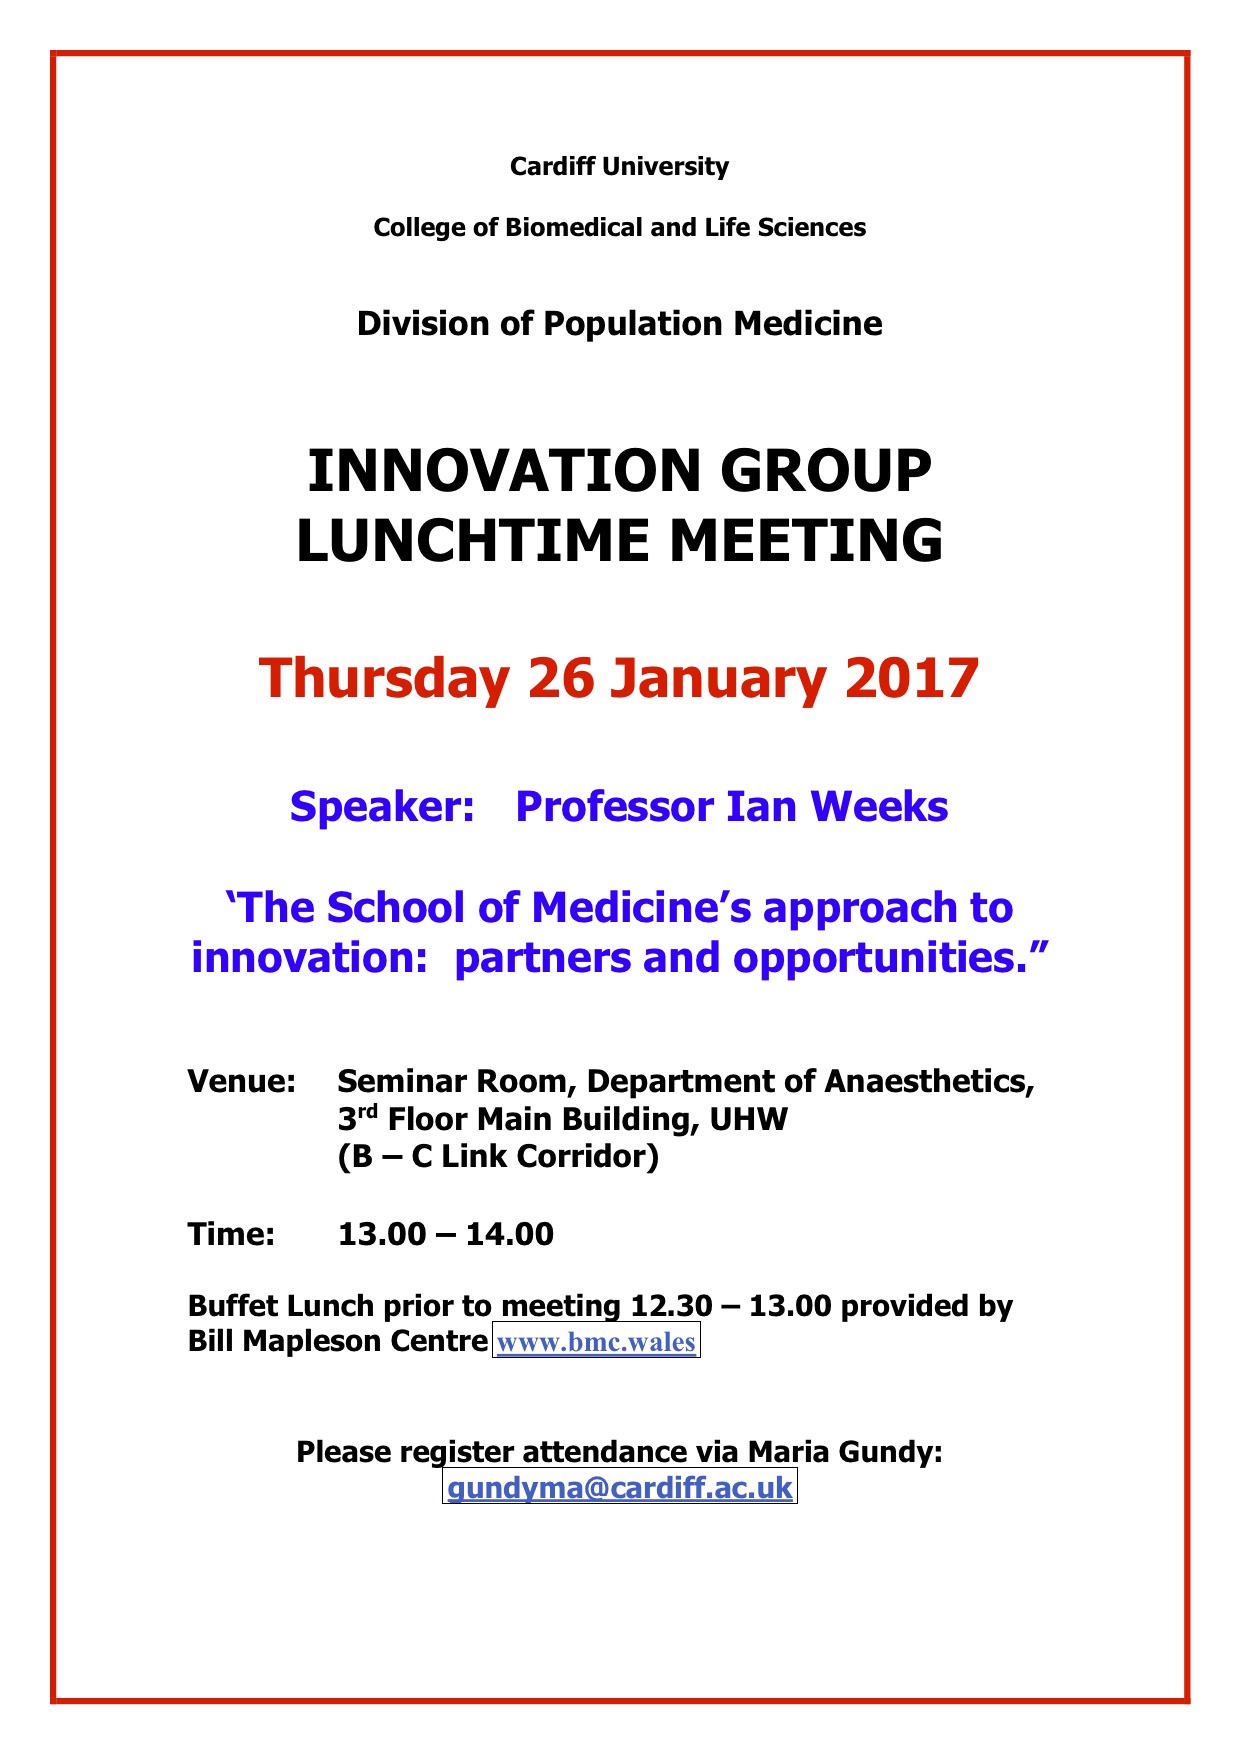 innovation-group-meeting-26-1-17